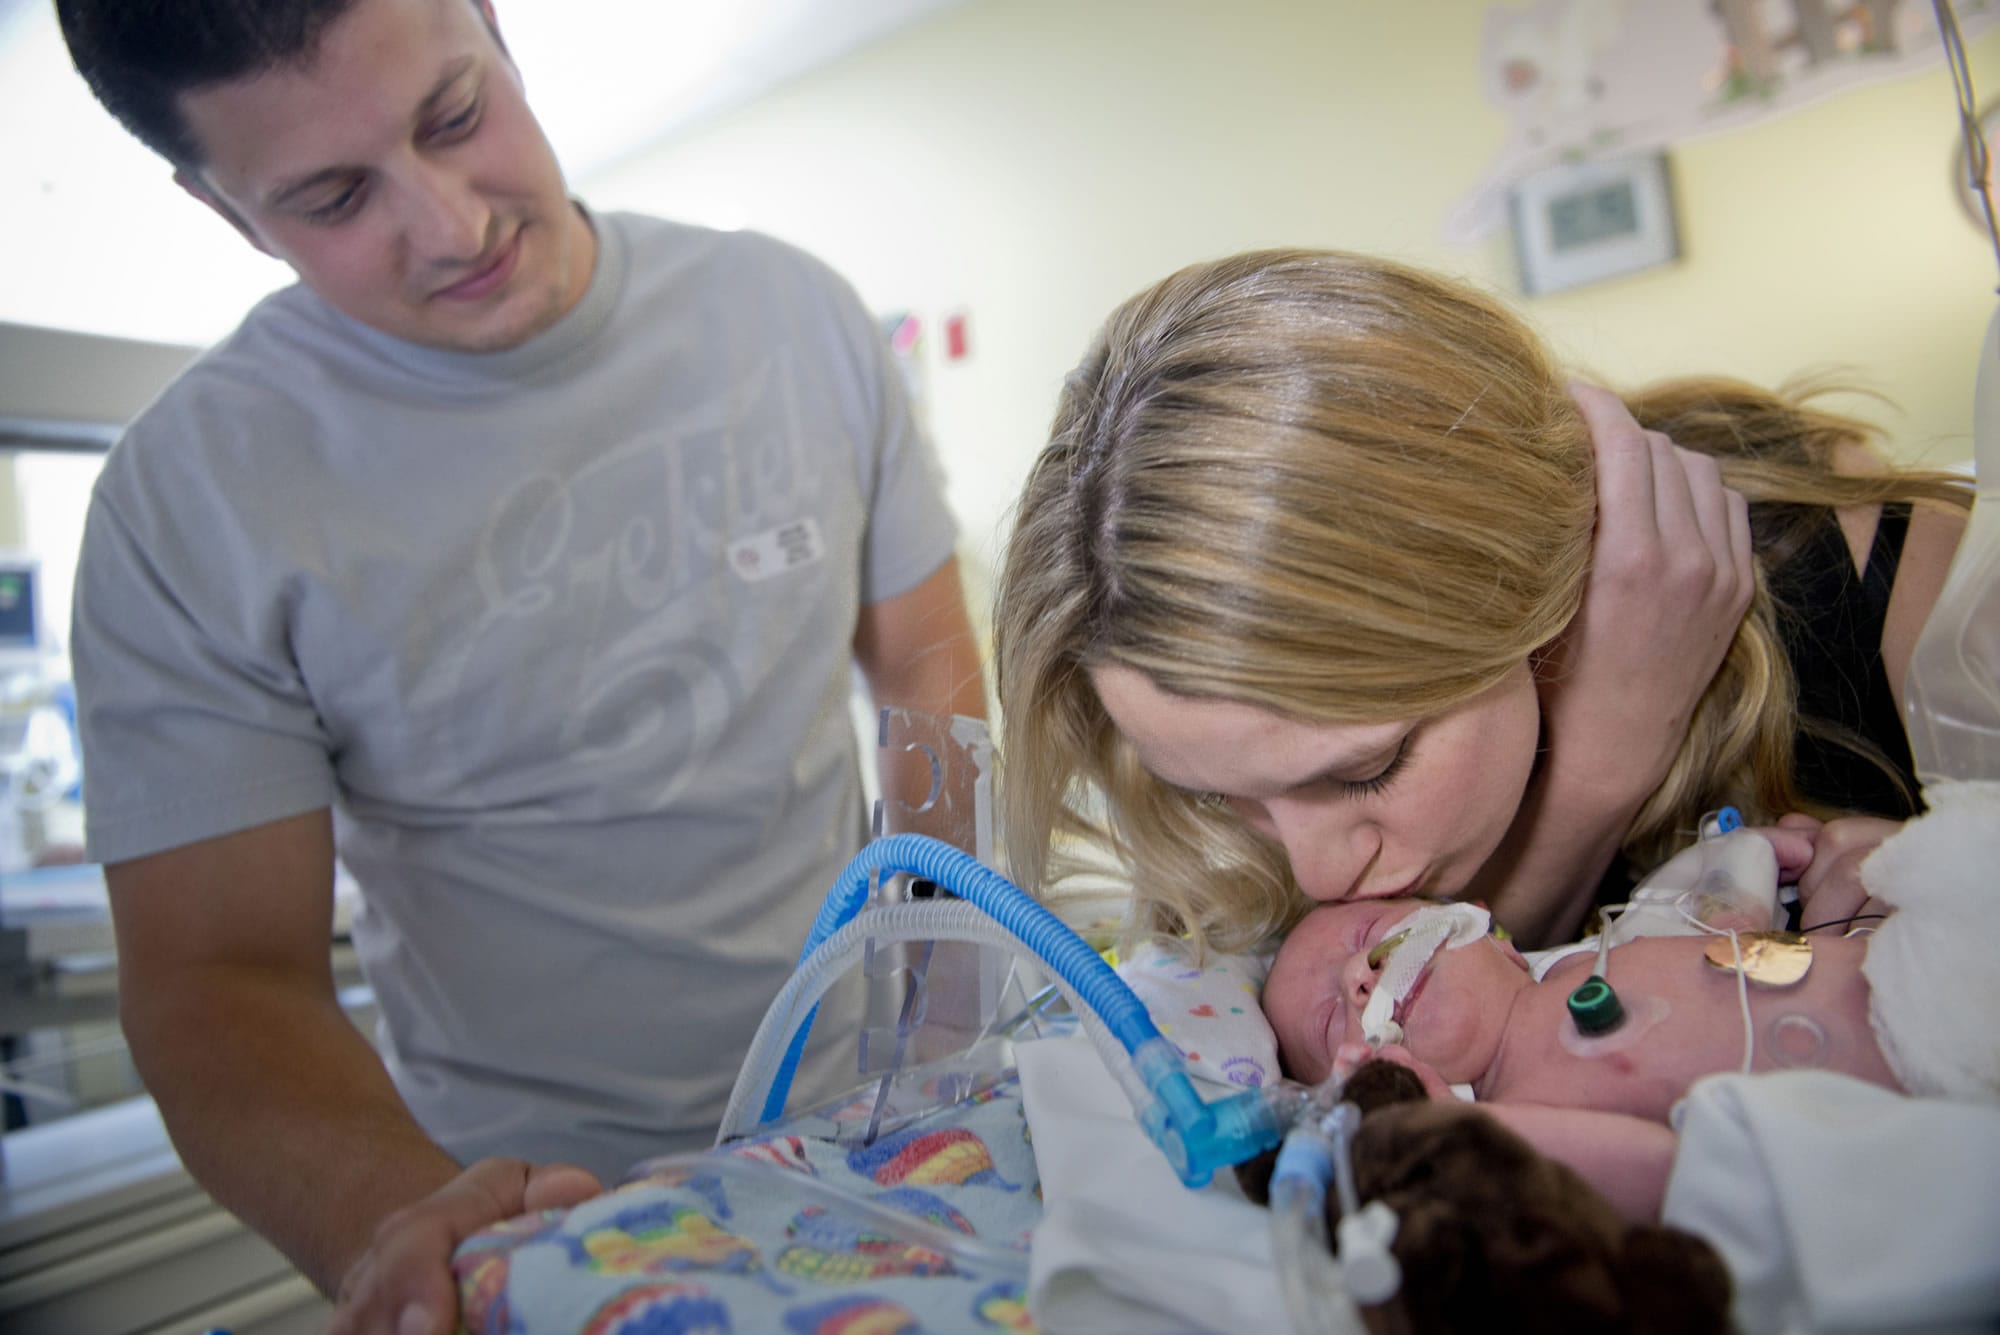 Annie Bollinger and Nick Silveira visit their 5-day-old son, Carter Silveira, in the NICU at Sutter Memorial Hospital in East Sacramento, Calif., on May 9.